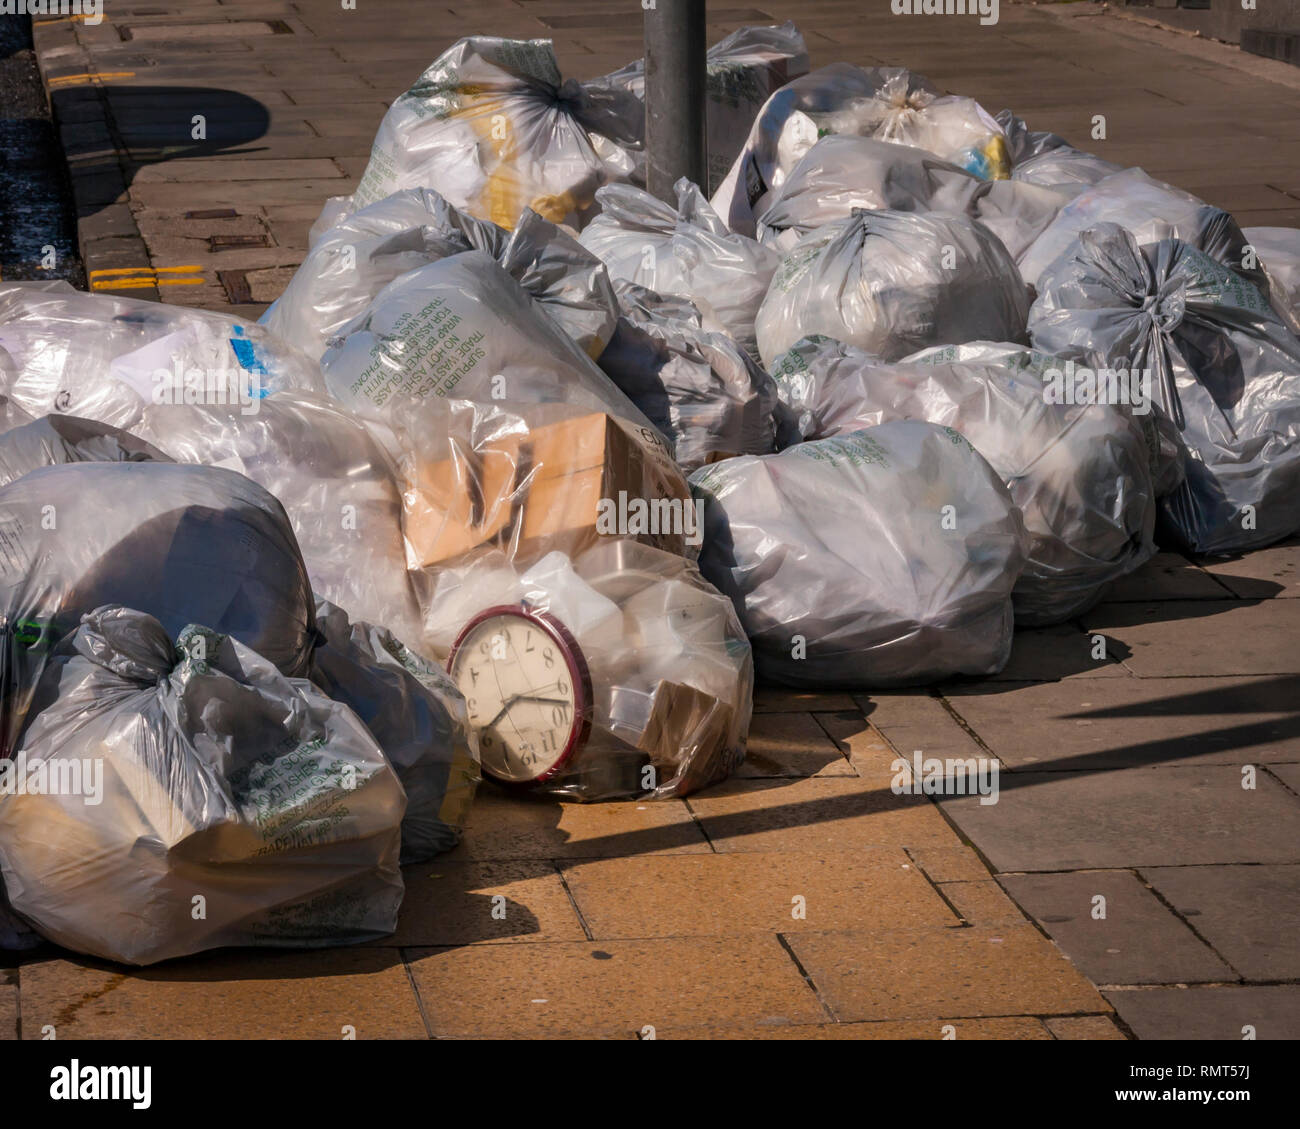 Edinburgh, Scotland - May 11 2015: A Waste of Time. Photograph showing an office clock inside plastic bags of rubbish stacked in a city street. Stock Photo